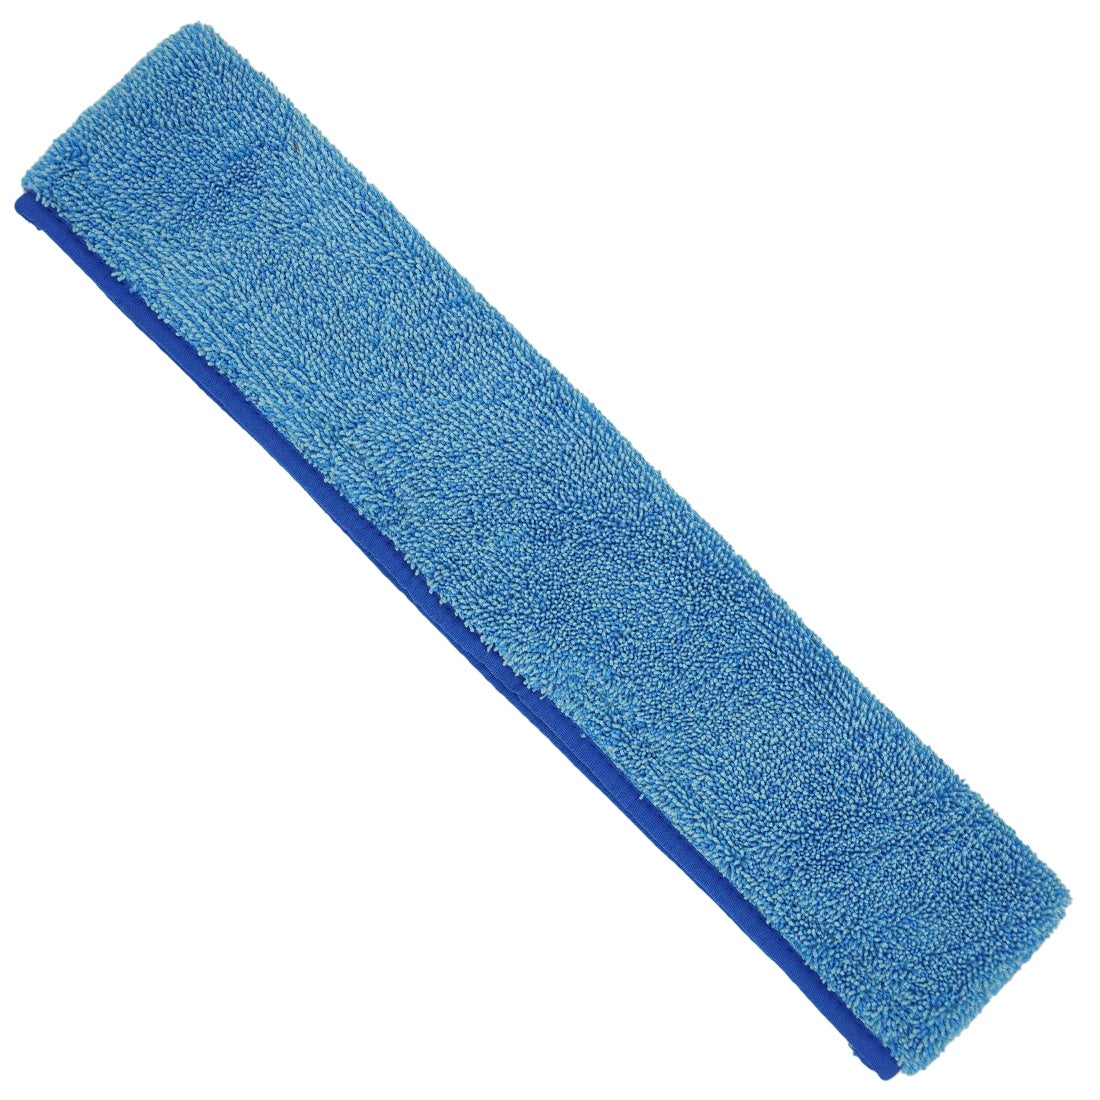 Wagtail Applicator T-Bar Microfiber Sleeve 18 Inch View